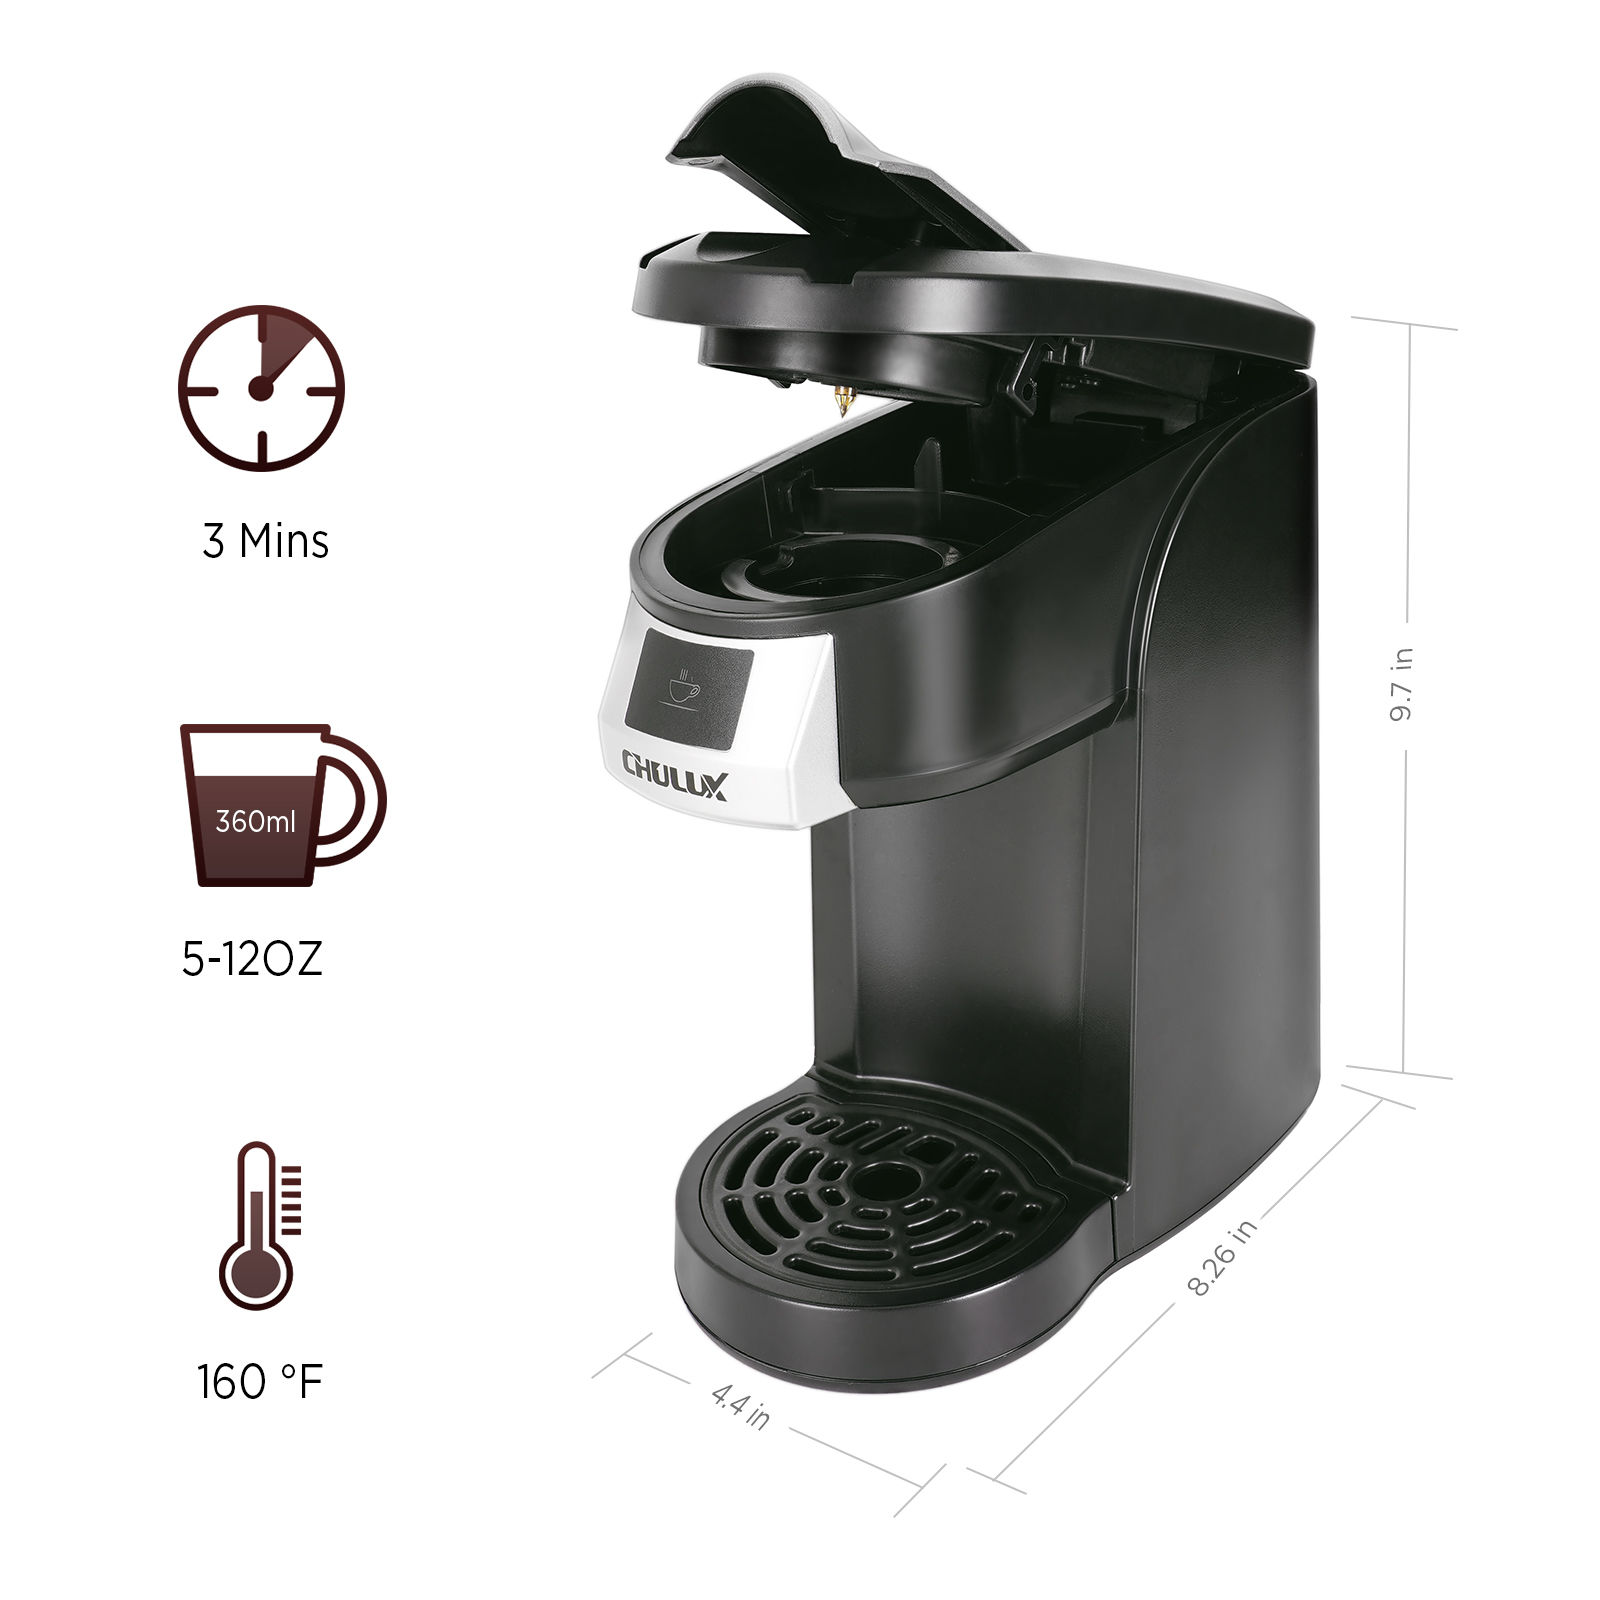 CHULUX Single Cup Coffee Maker Brewer,One Touch Function Compact Pod Mini Coffee  Machine with Reusable Coffee Filter Cup,White